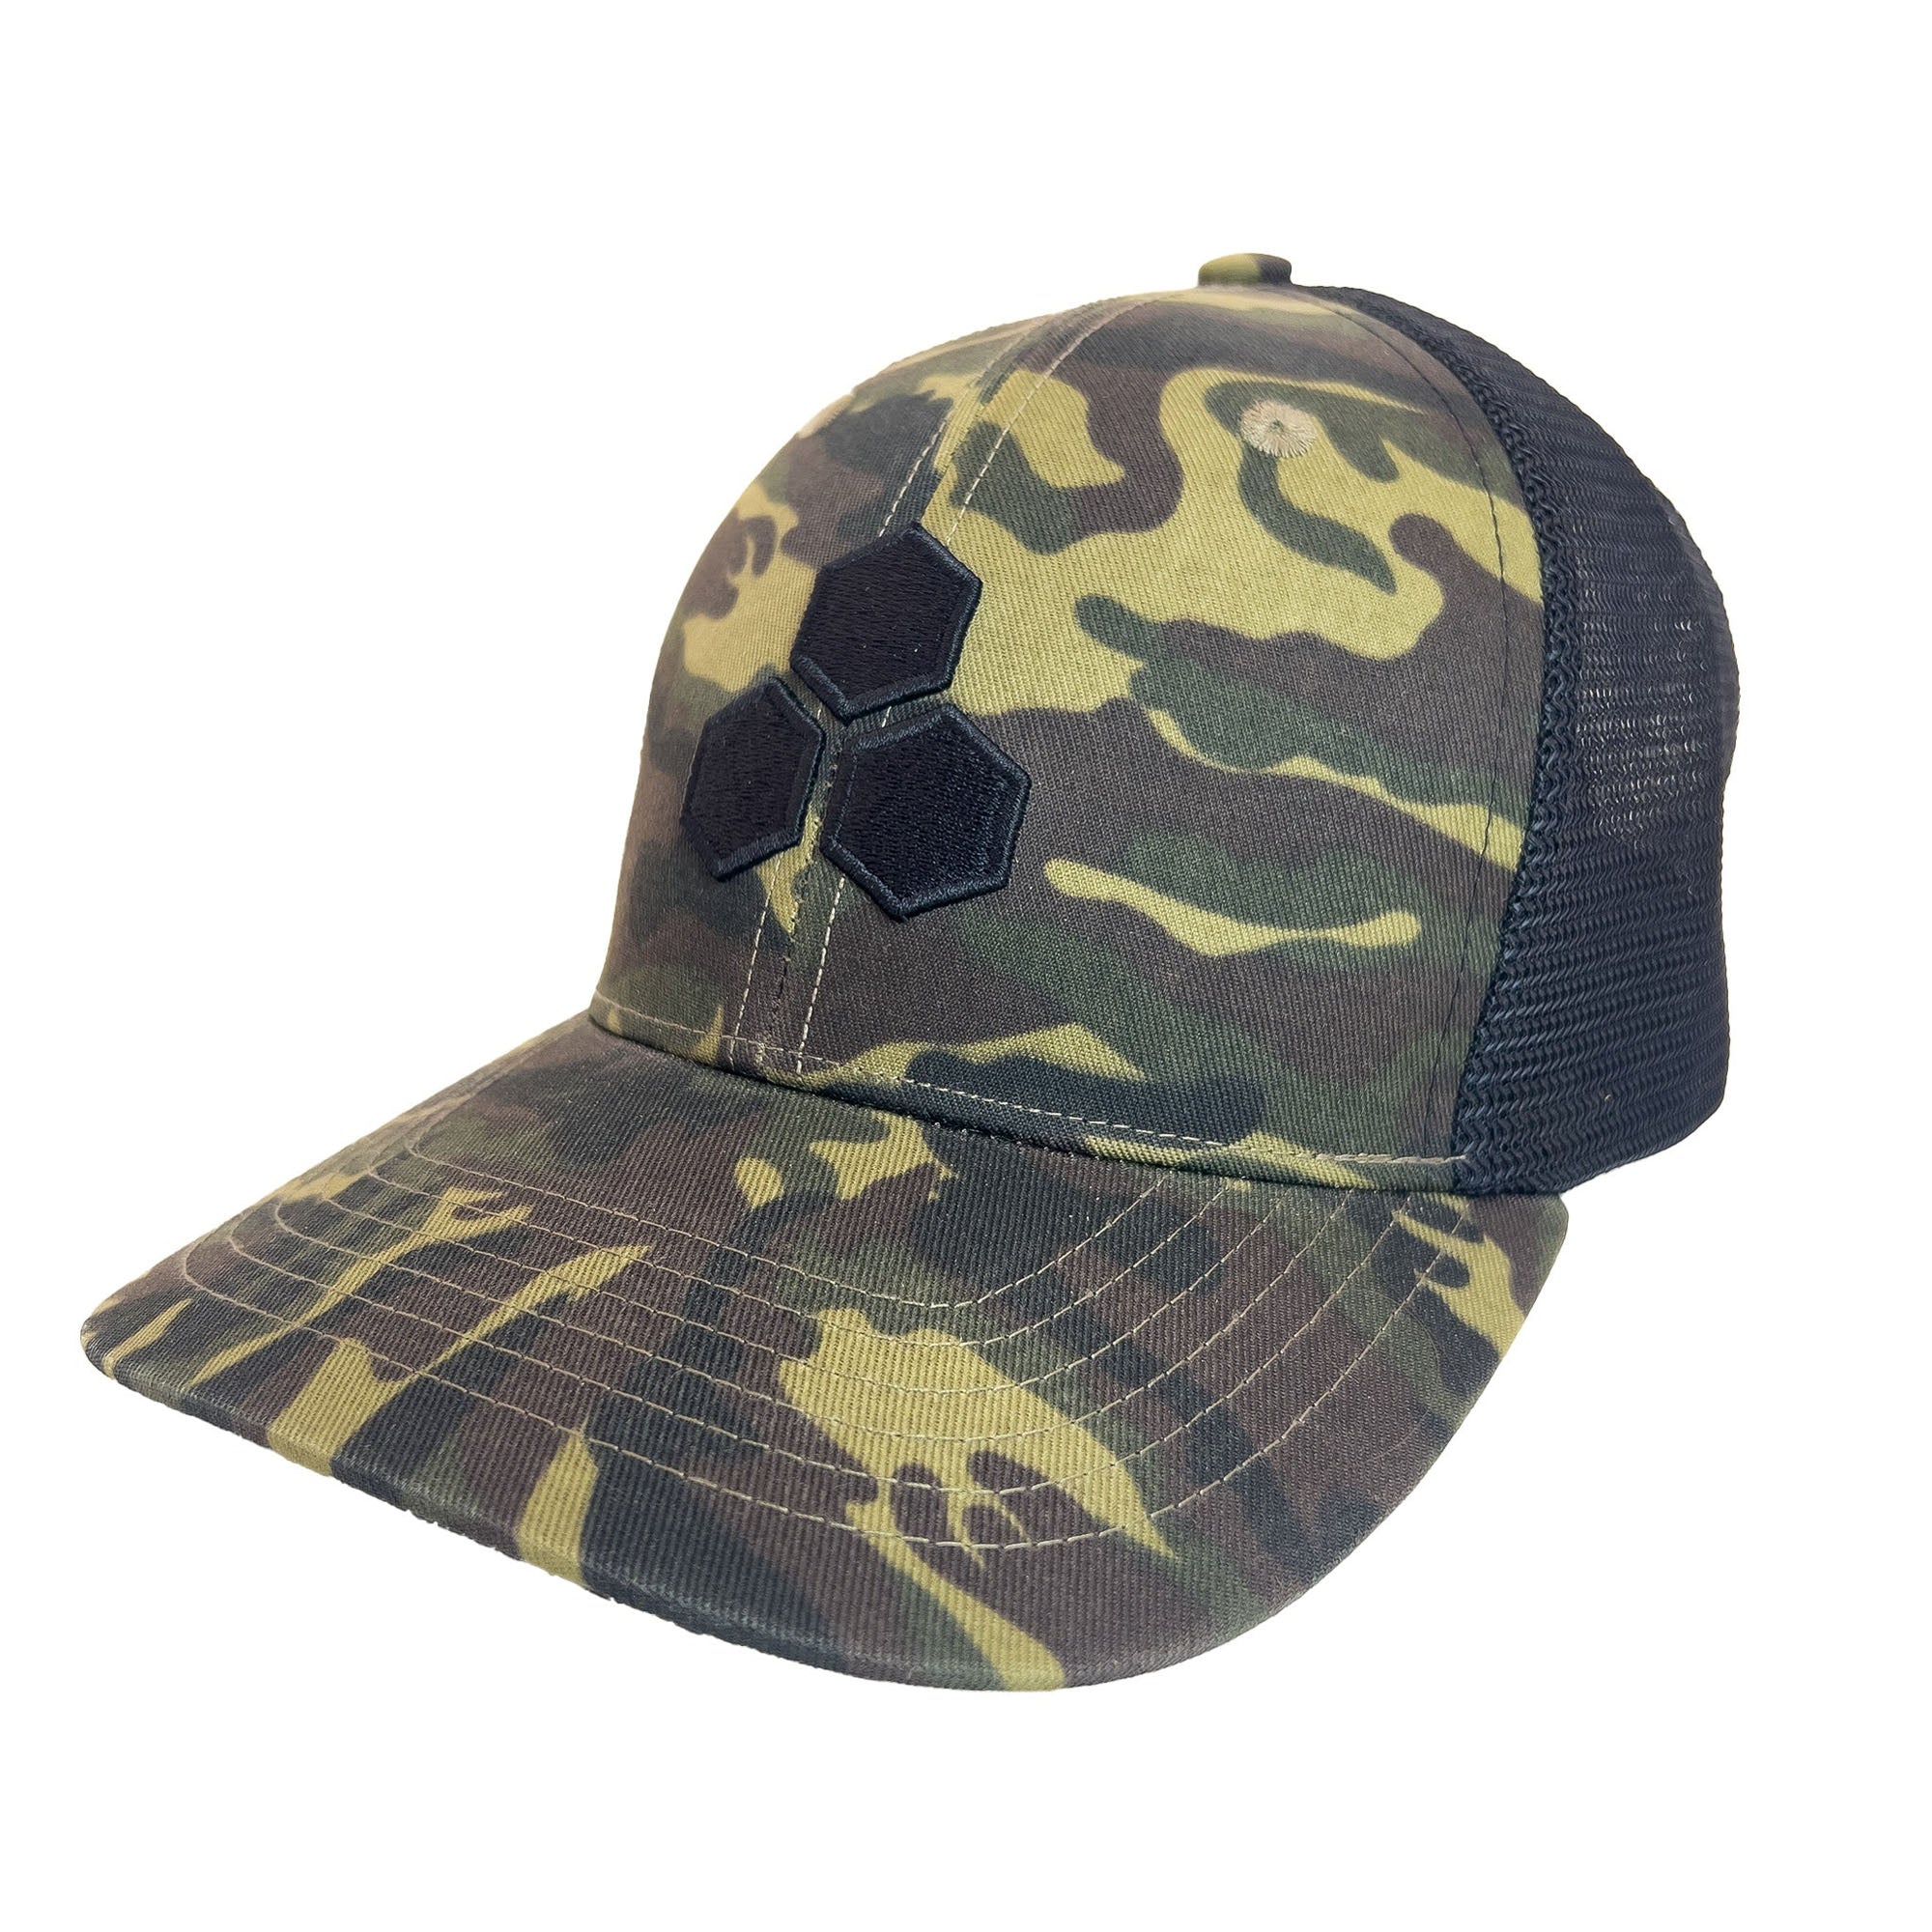 Channel Islands Country Camo Men's Hat